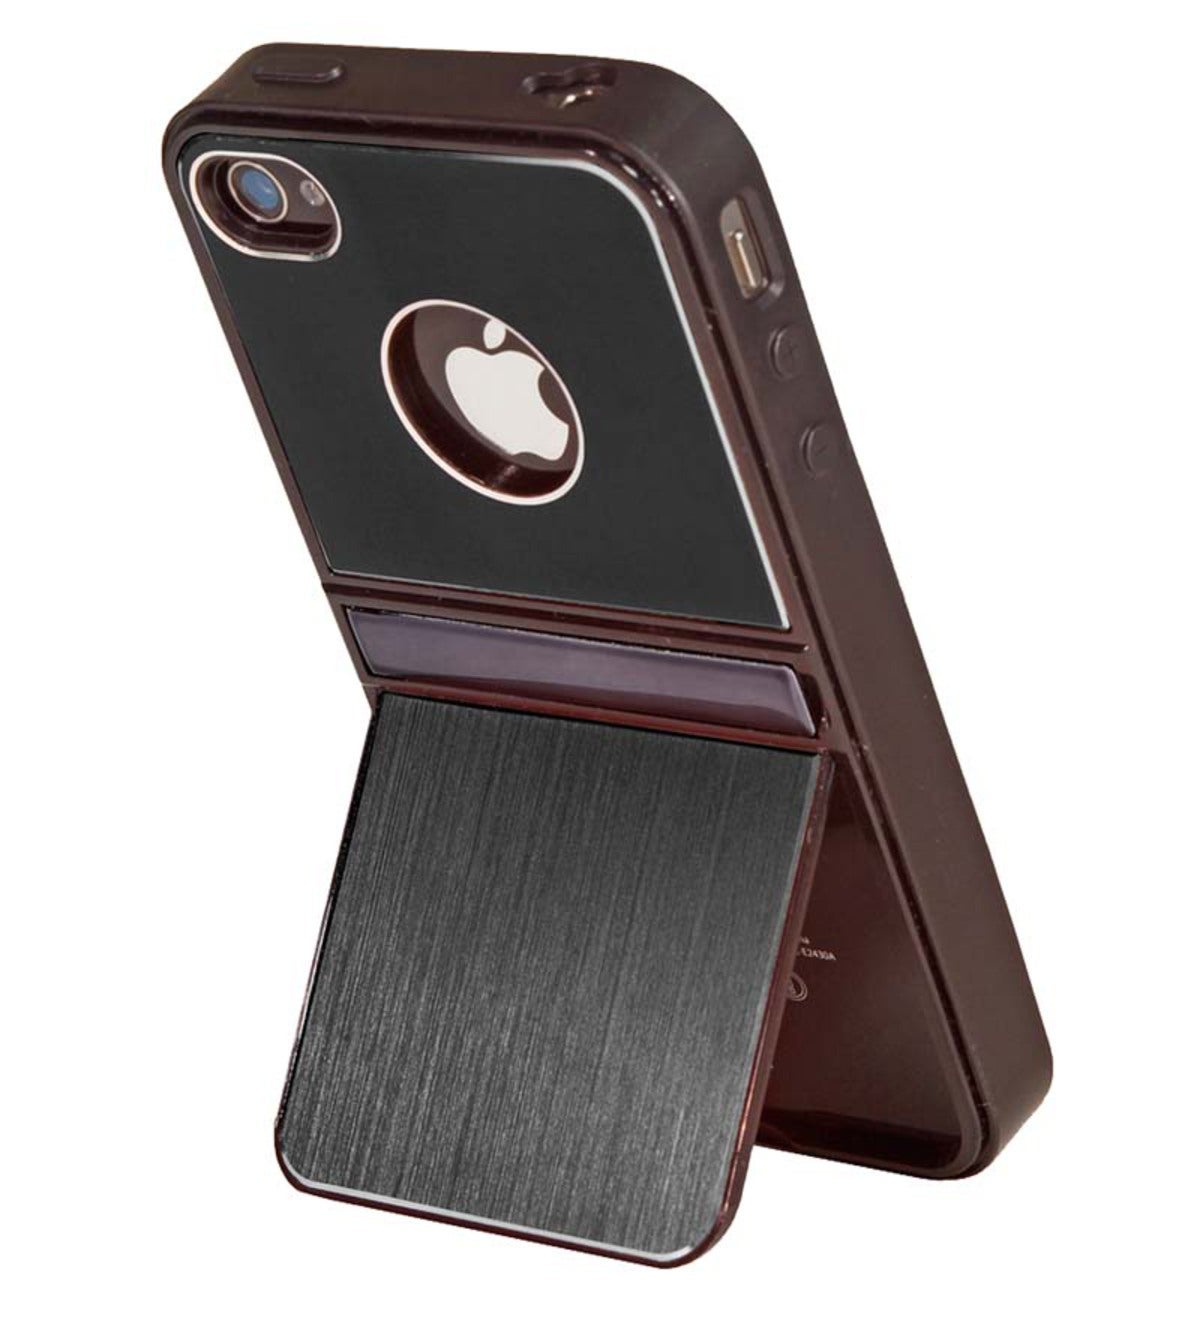 Props Kicks Case for iPhone 4/4S with Built-In Dual Stand - Black